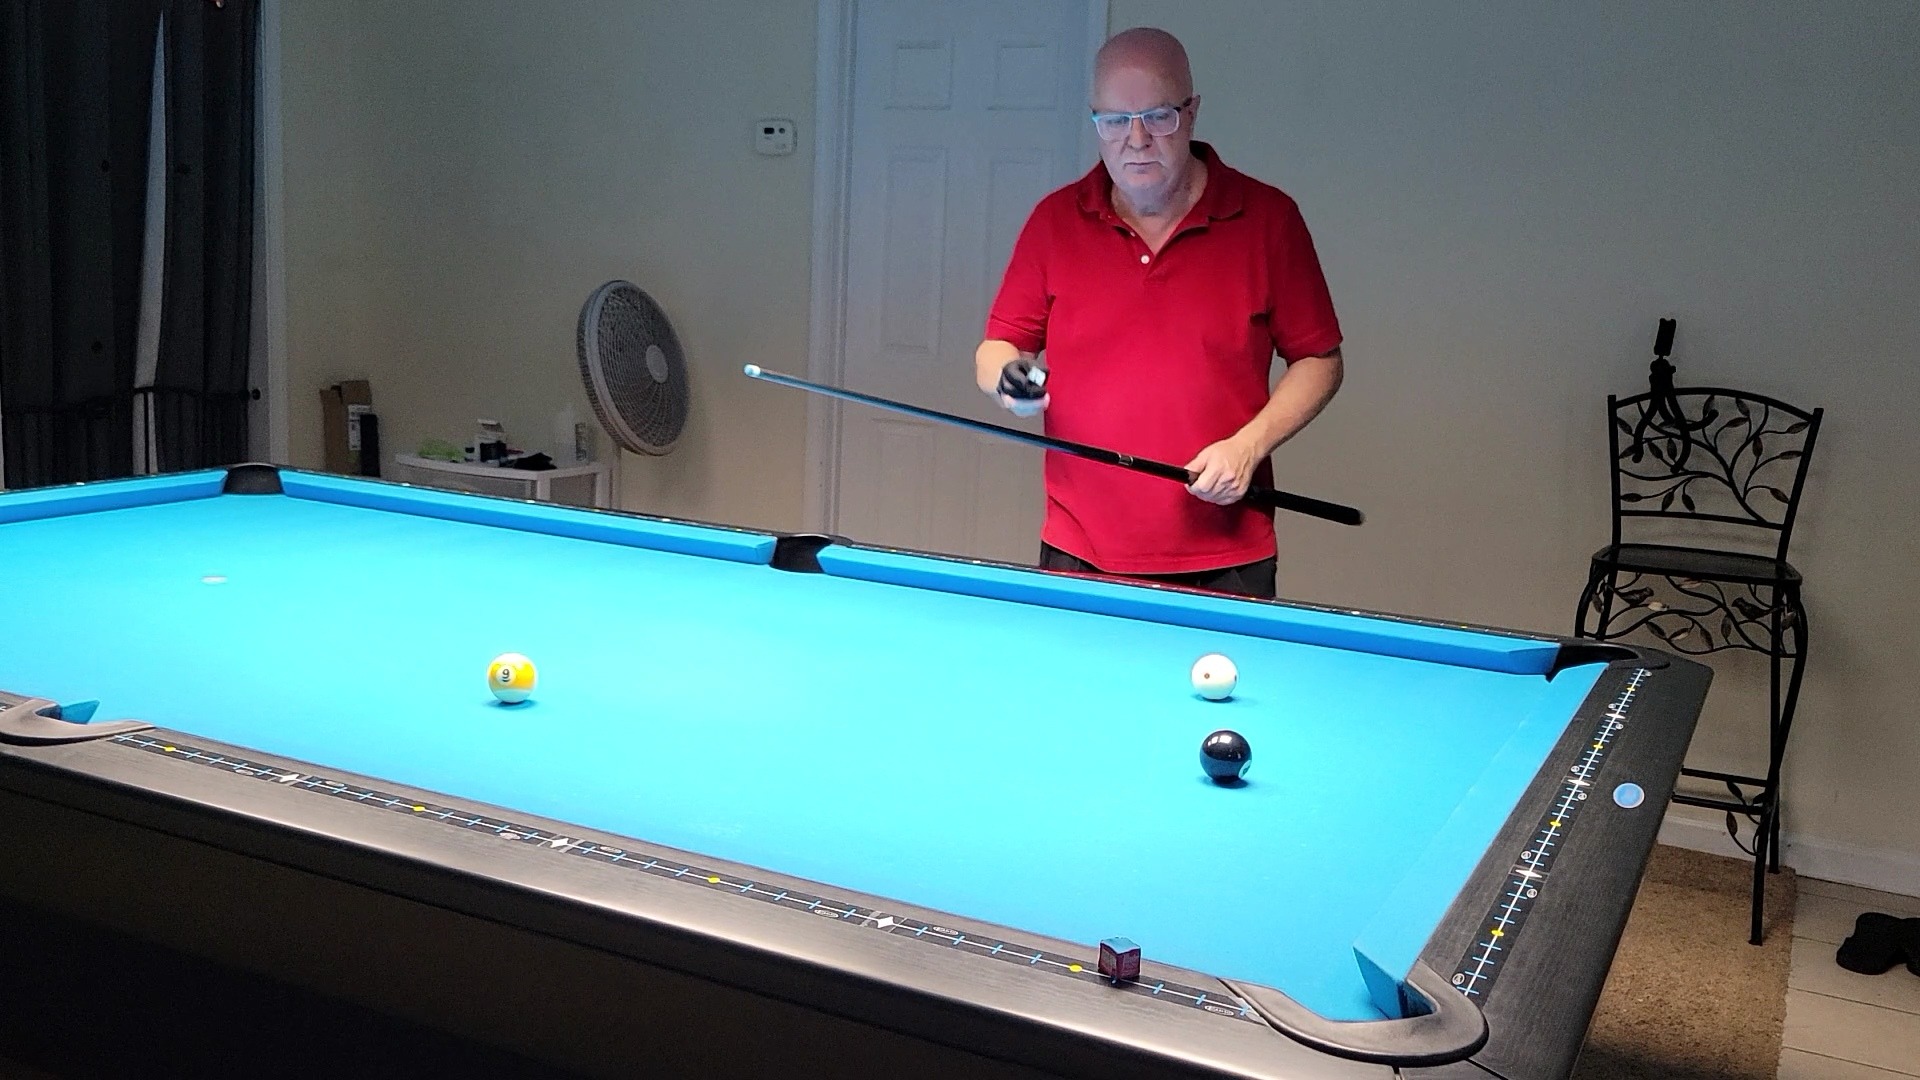 Online courses on how to play billiards